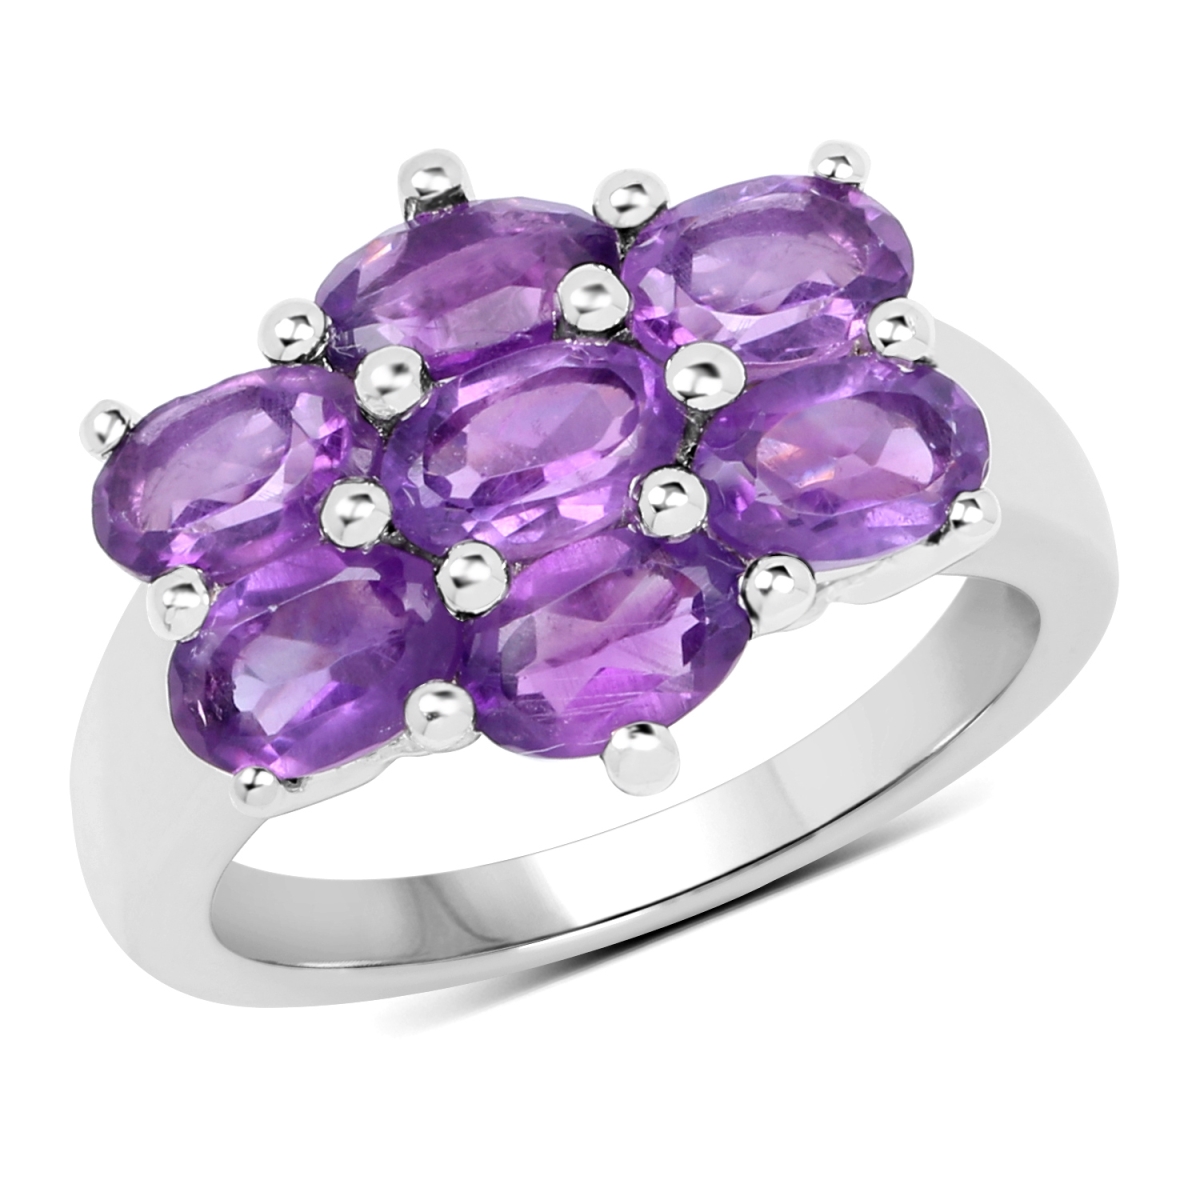 Picture of HauteFacets QR19175A-SSR-6 3.01 Carat Sterling Silver Oval Ring  Purple - Size 6